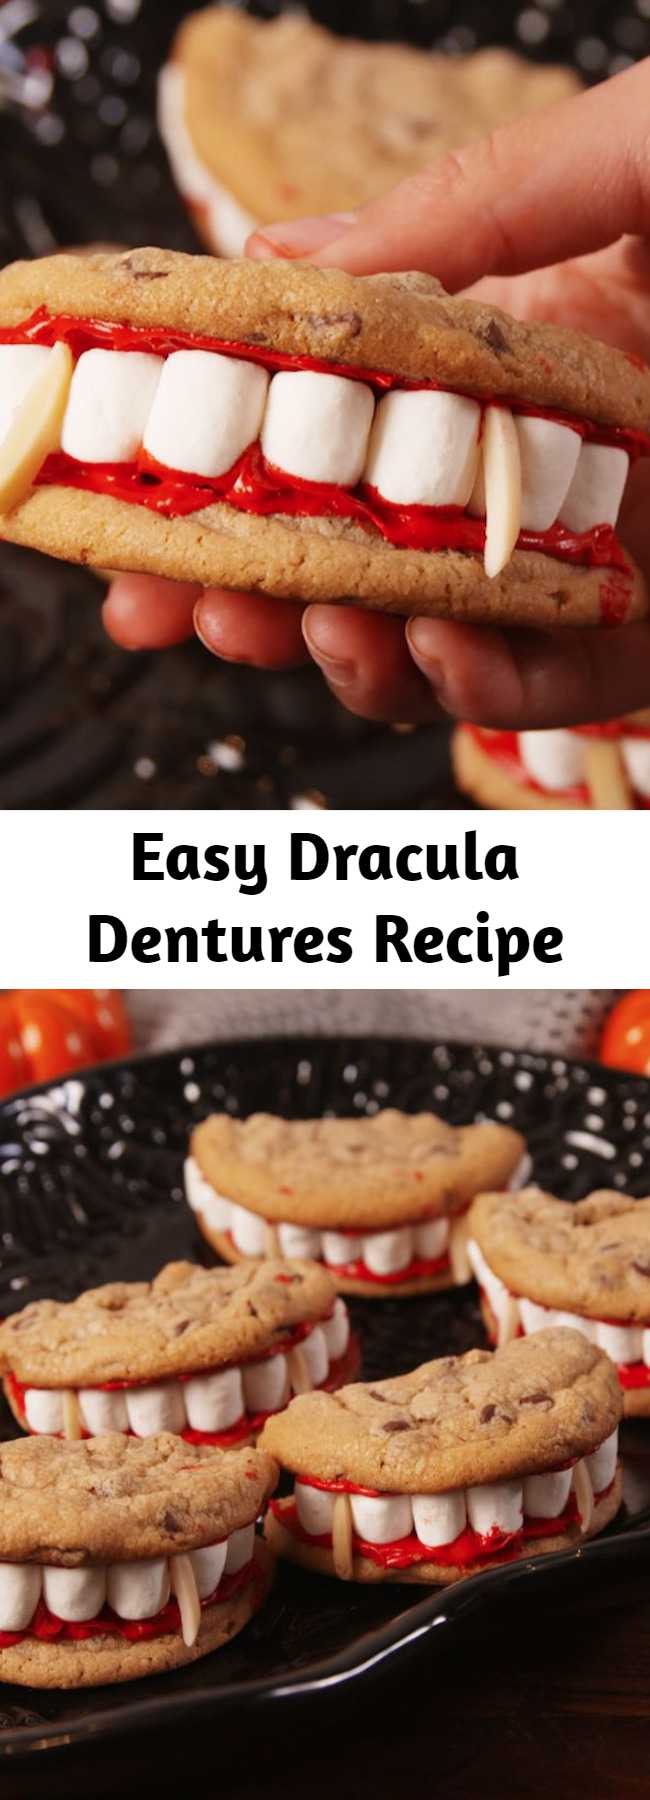 Easy Dracula Dentures Recipe - The only tasty dentures. Look at those marshmallowy whites.